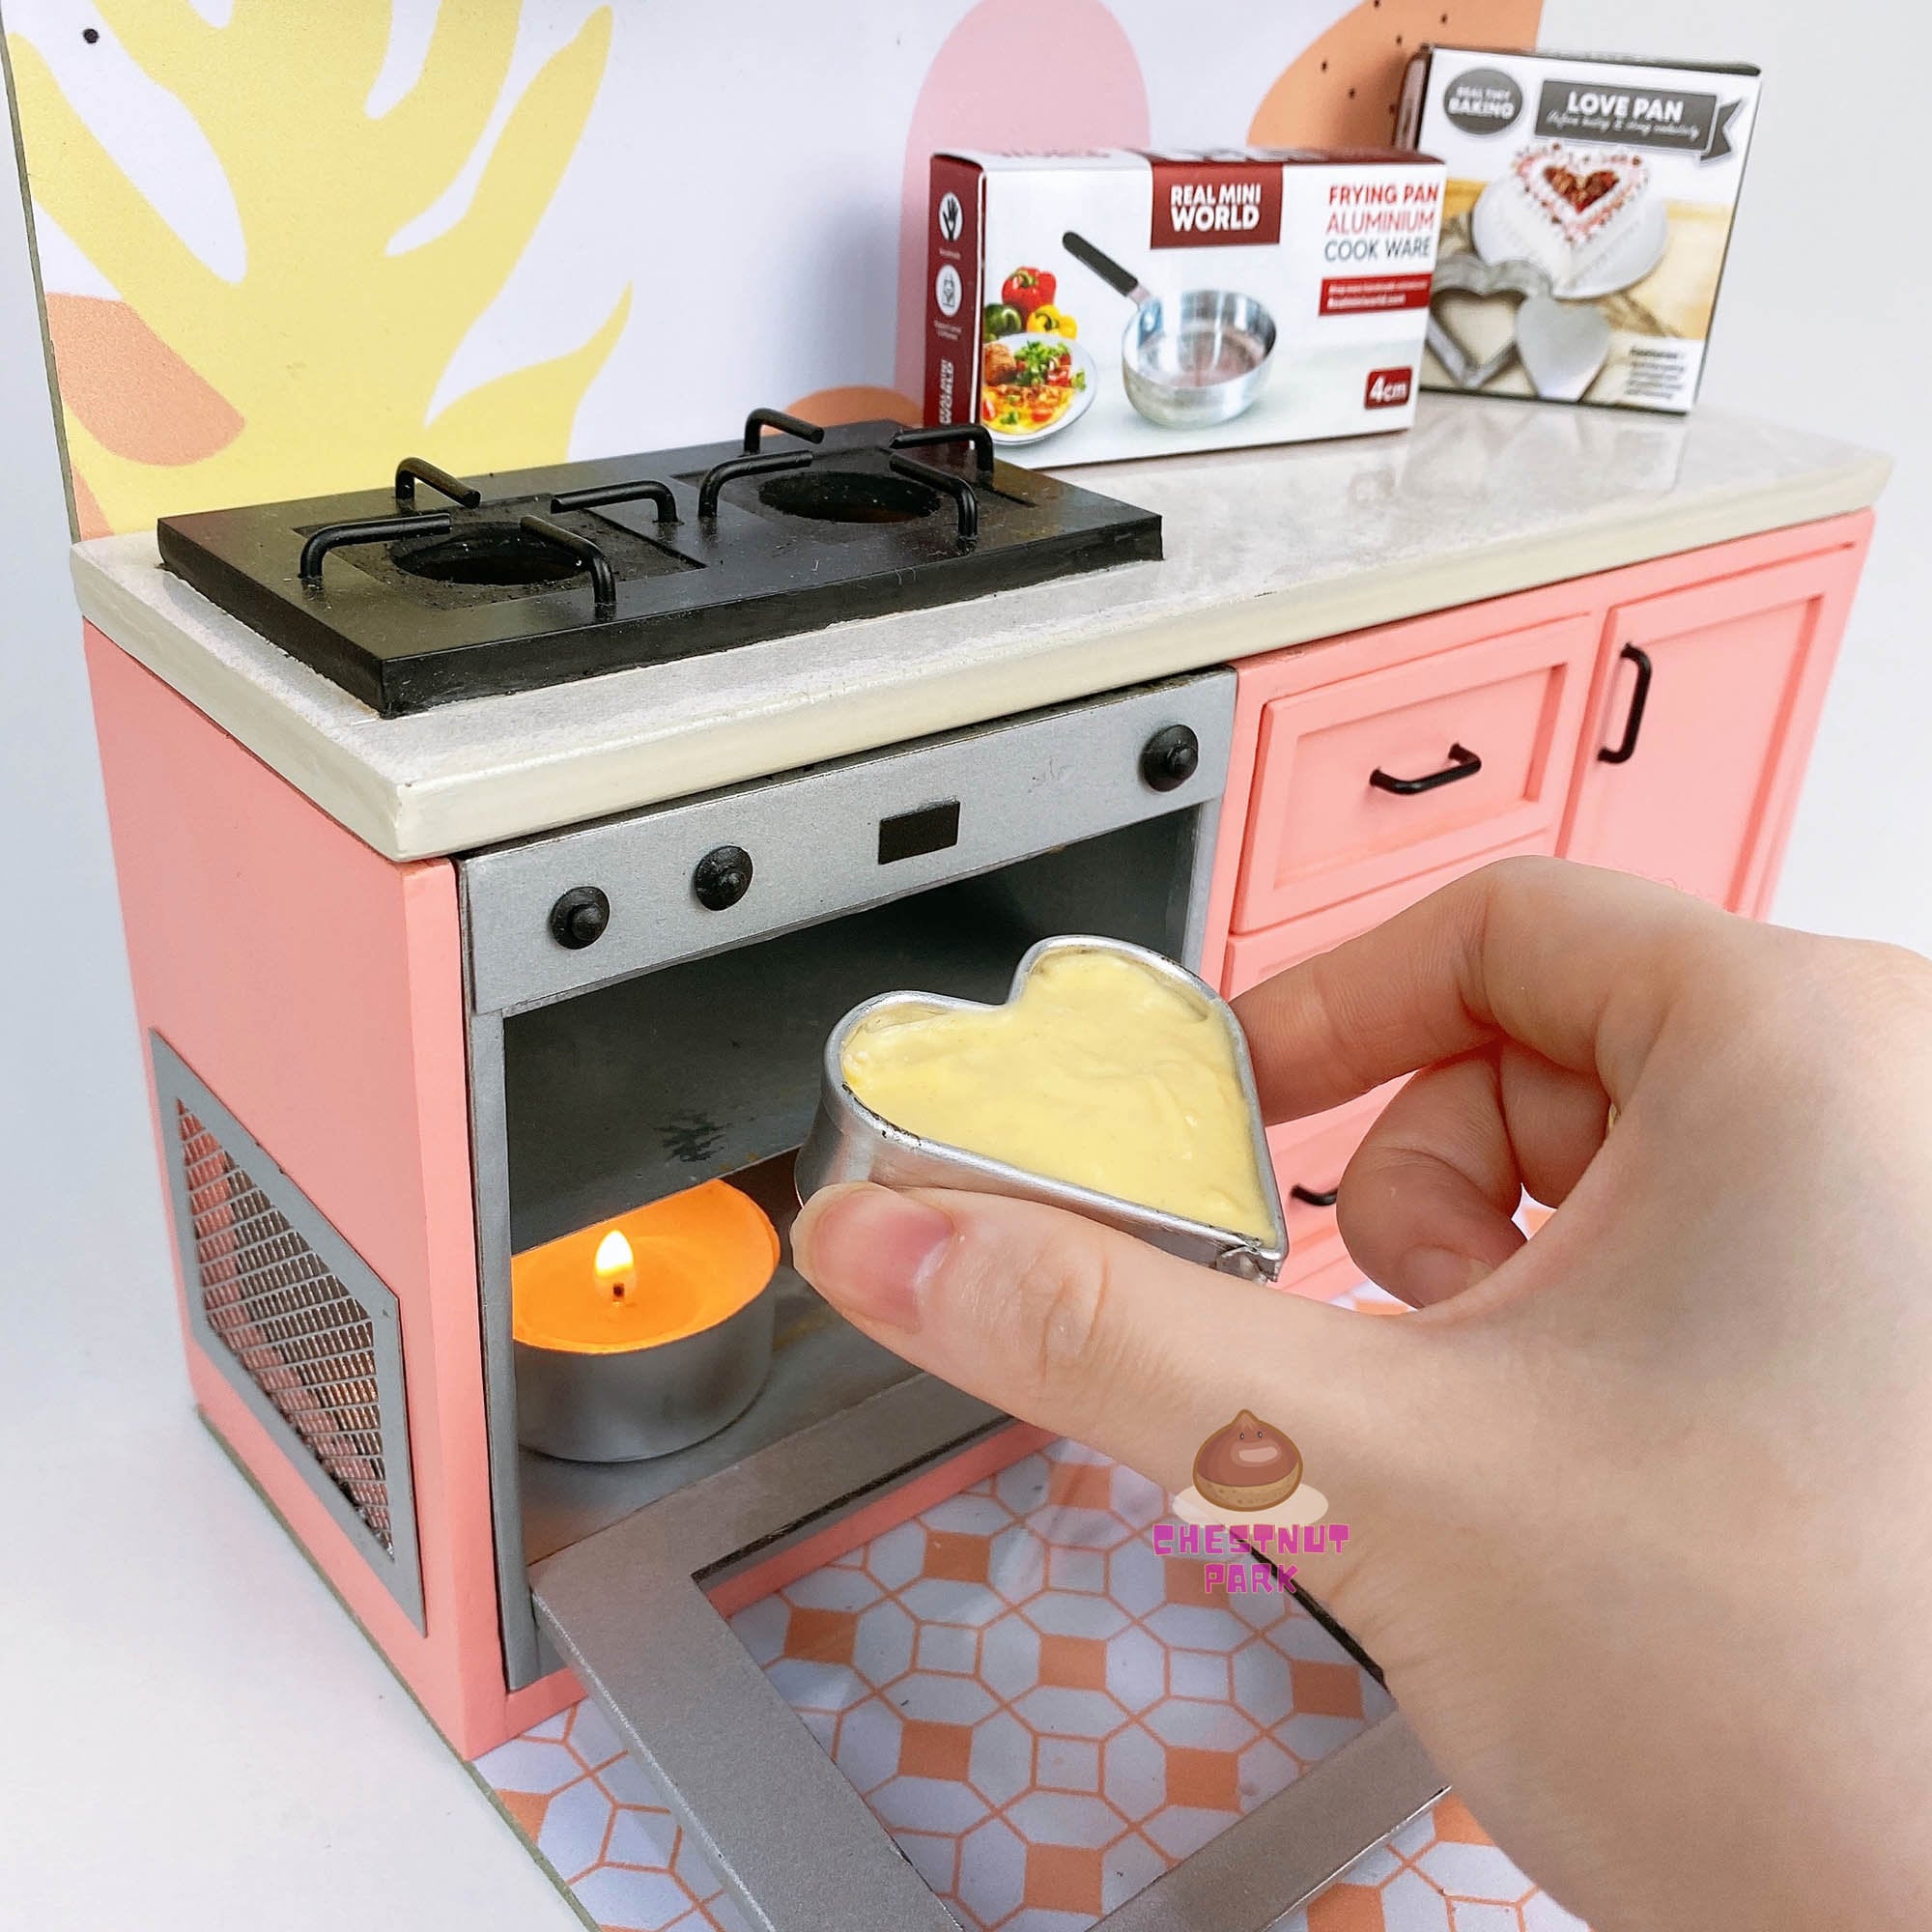 Miniature Real Cooking Kitchen Set : cook real mini edible food